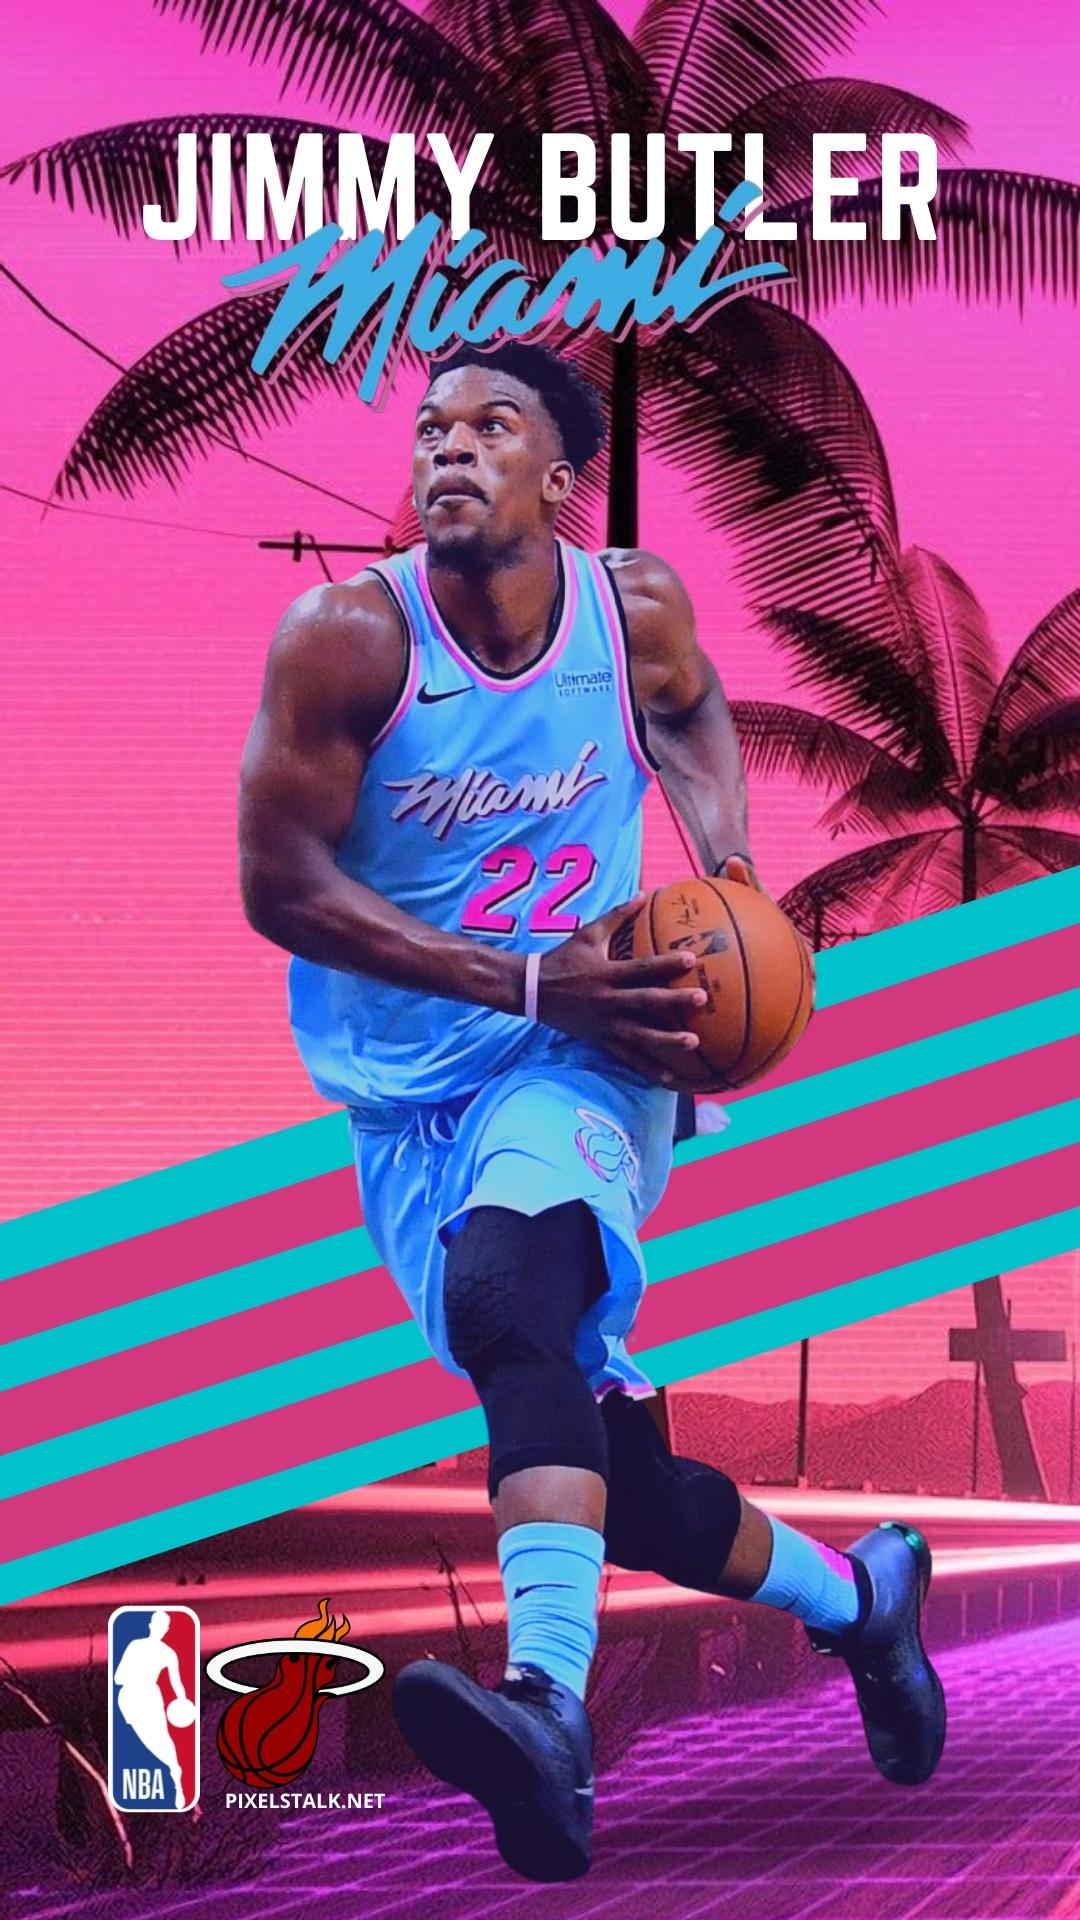 Jimmy butler wallpaper by Sports_2626 - Download on ZEDGE™